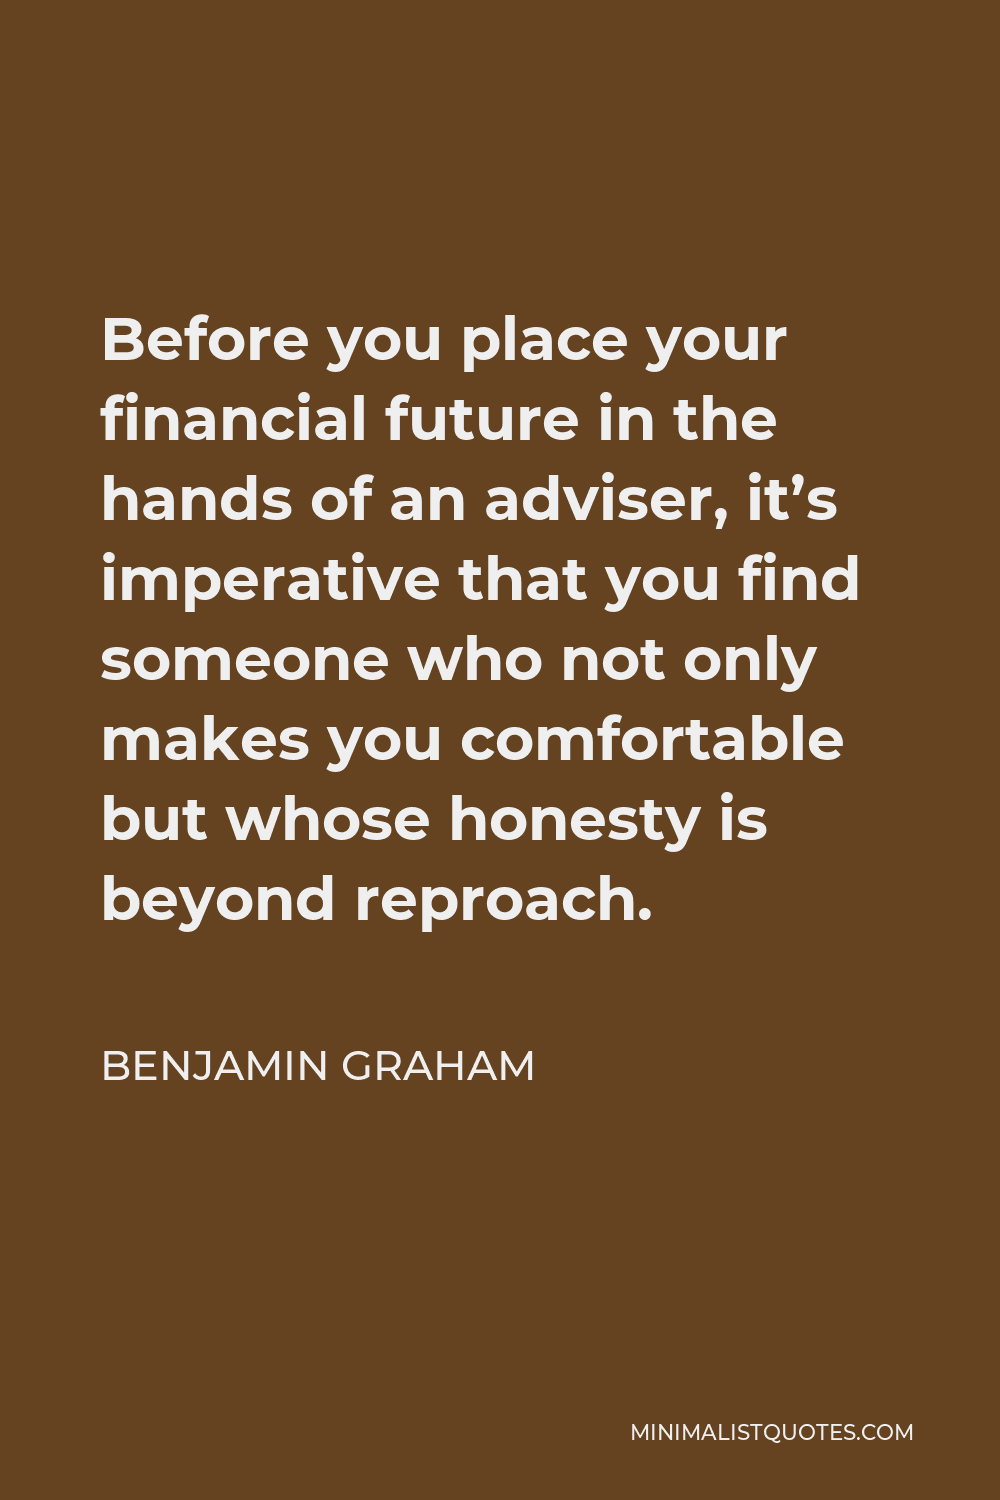 Benjamin Graham Quote - Before you place your financial future in the hands of an adviser, it’s imperative that you find someone who not only makes you comfortable but whose honesty is beyond reproach.